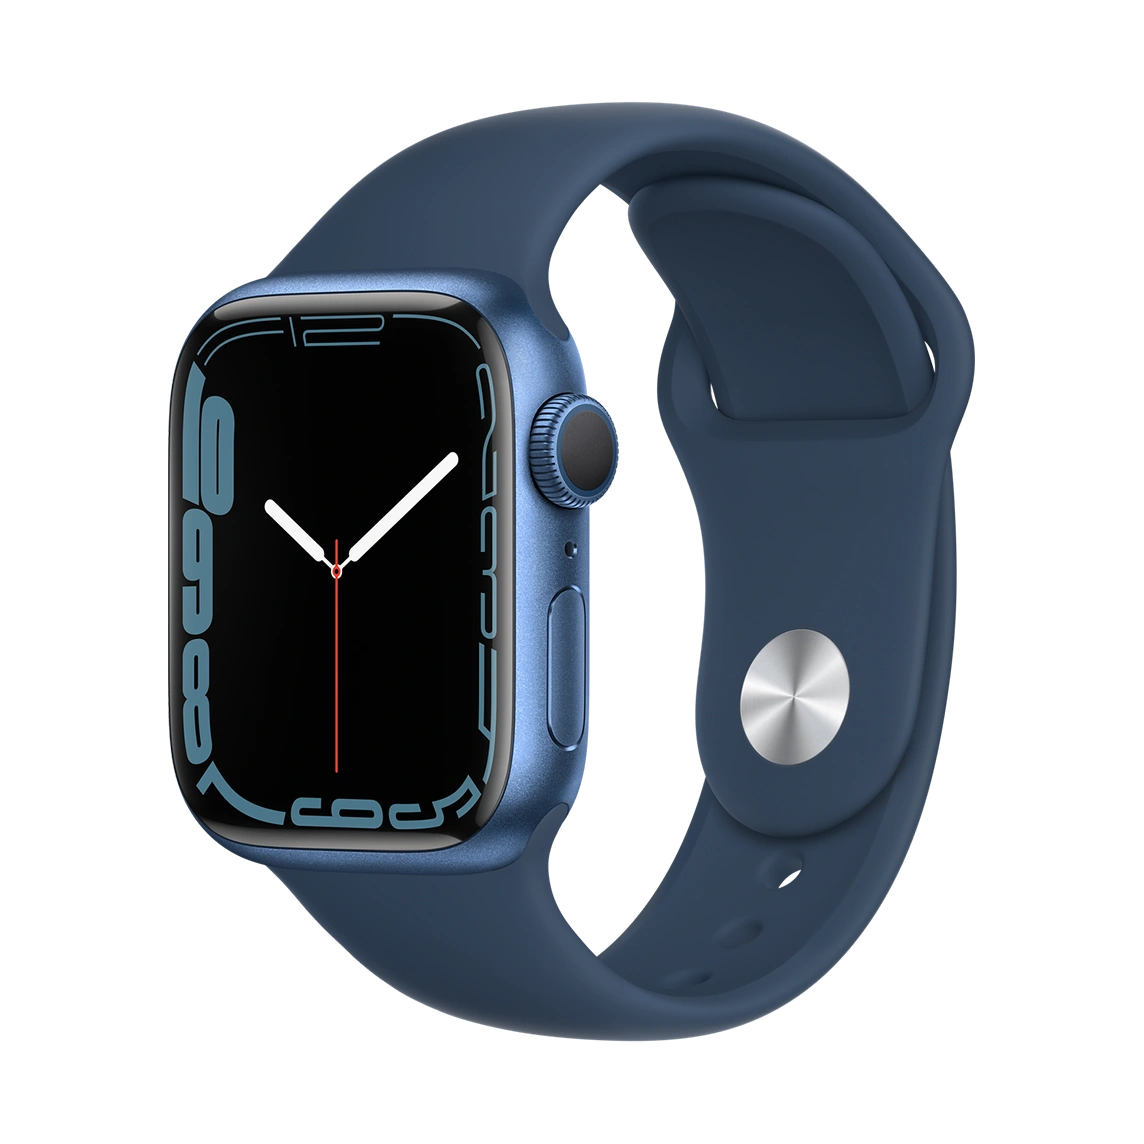 apple-watch-series-7-blue-aluminum-case-with-abyss-blue-silicone-band